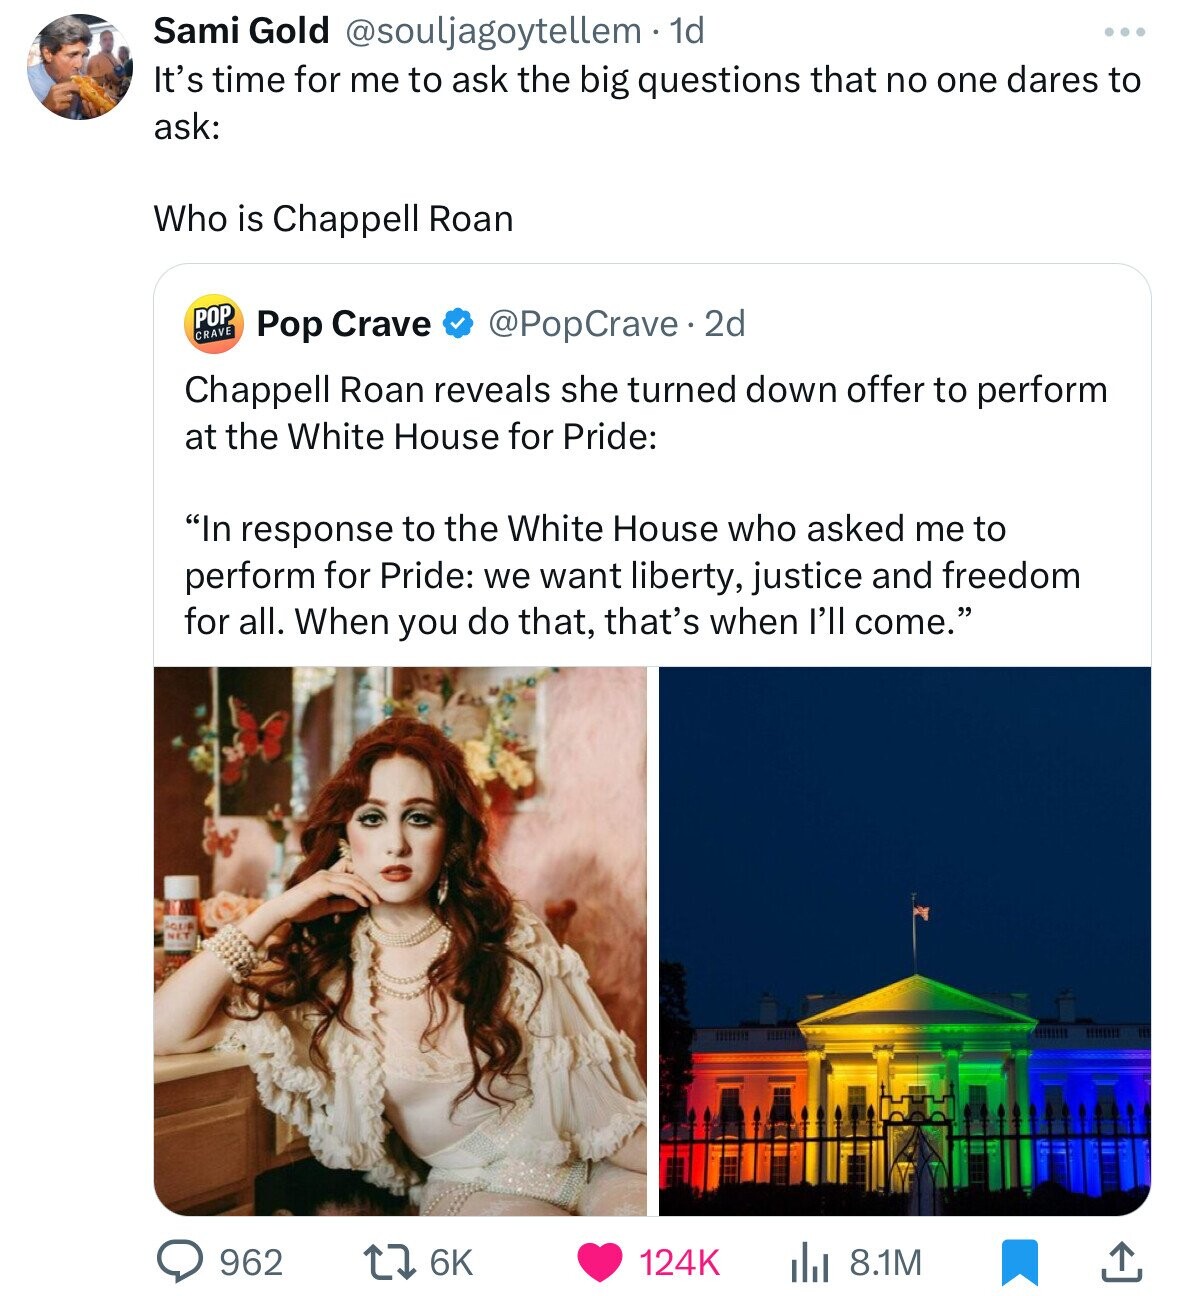 rise and fall of a midwest princess - Sami Gold . 1d It's time for me to ask the big questions that no one dares to ask Who is Chappell Roan Que Pop Crave Pop Crave 2d Chappell Roan reveals she turned down offer to perform at the White House for Pride "In